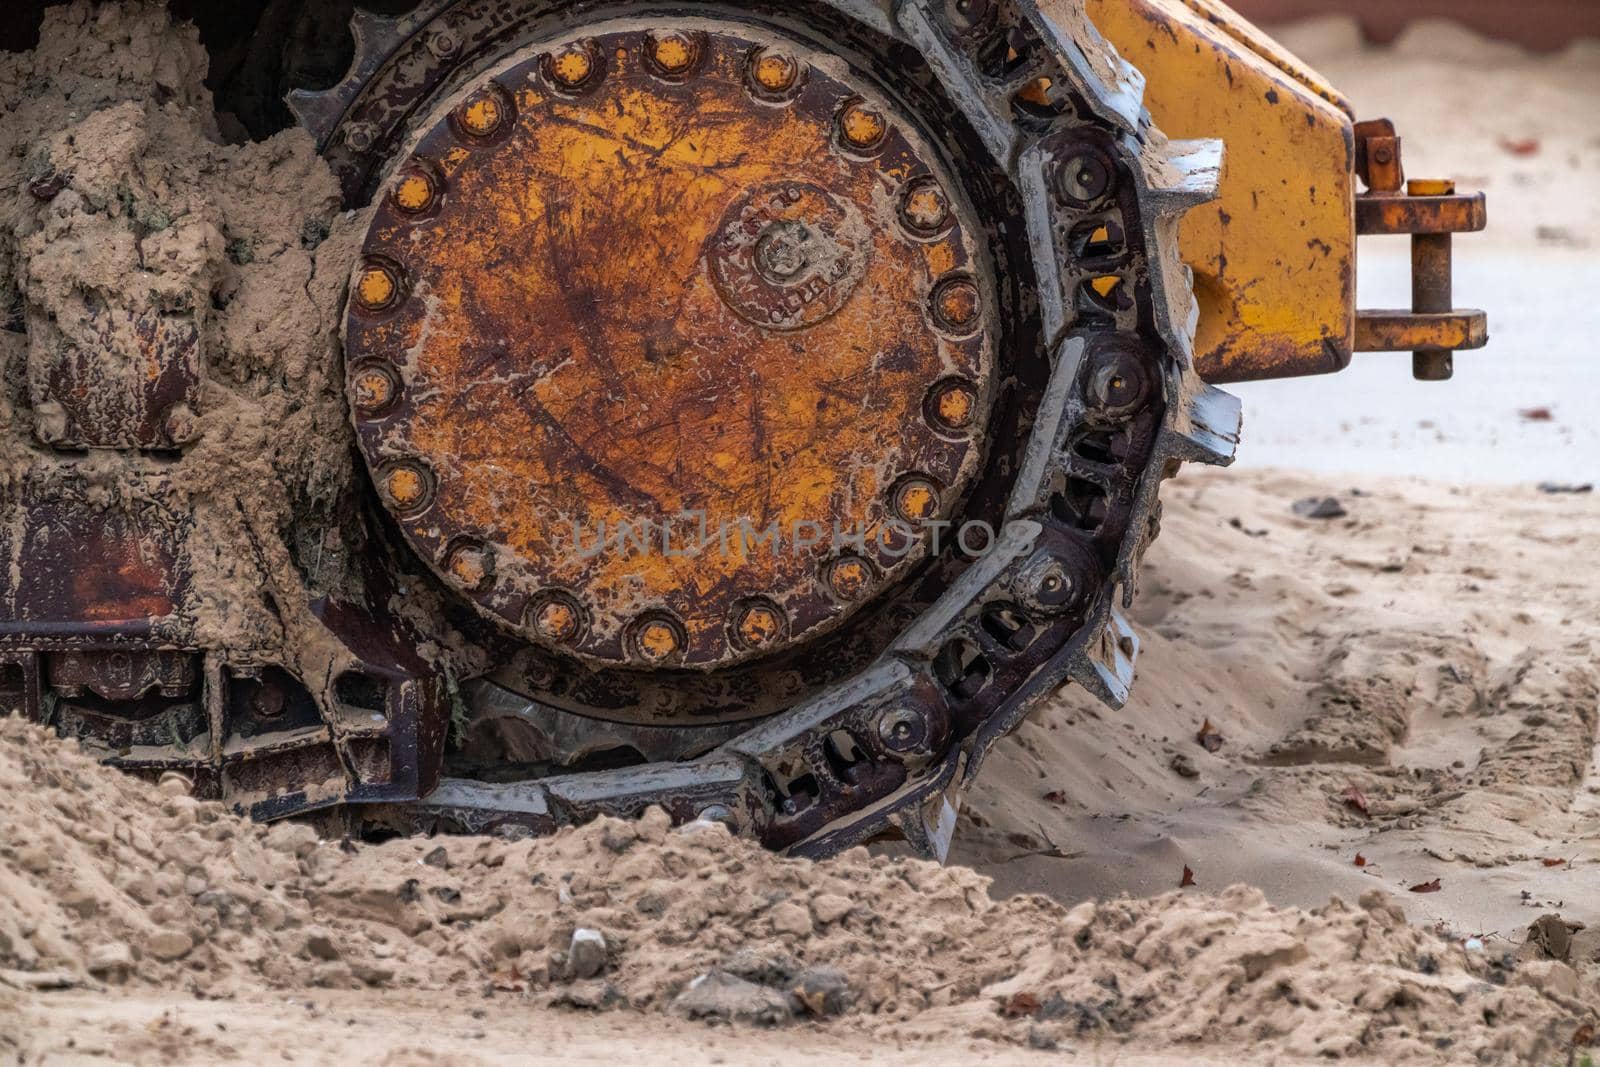 A closeup photograph of the track of an old large industrial yellow bulldozer machine weathered, rusty and worn sitting on a beach in Chicago.